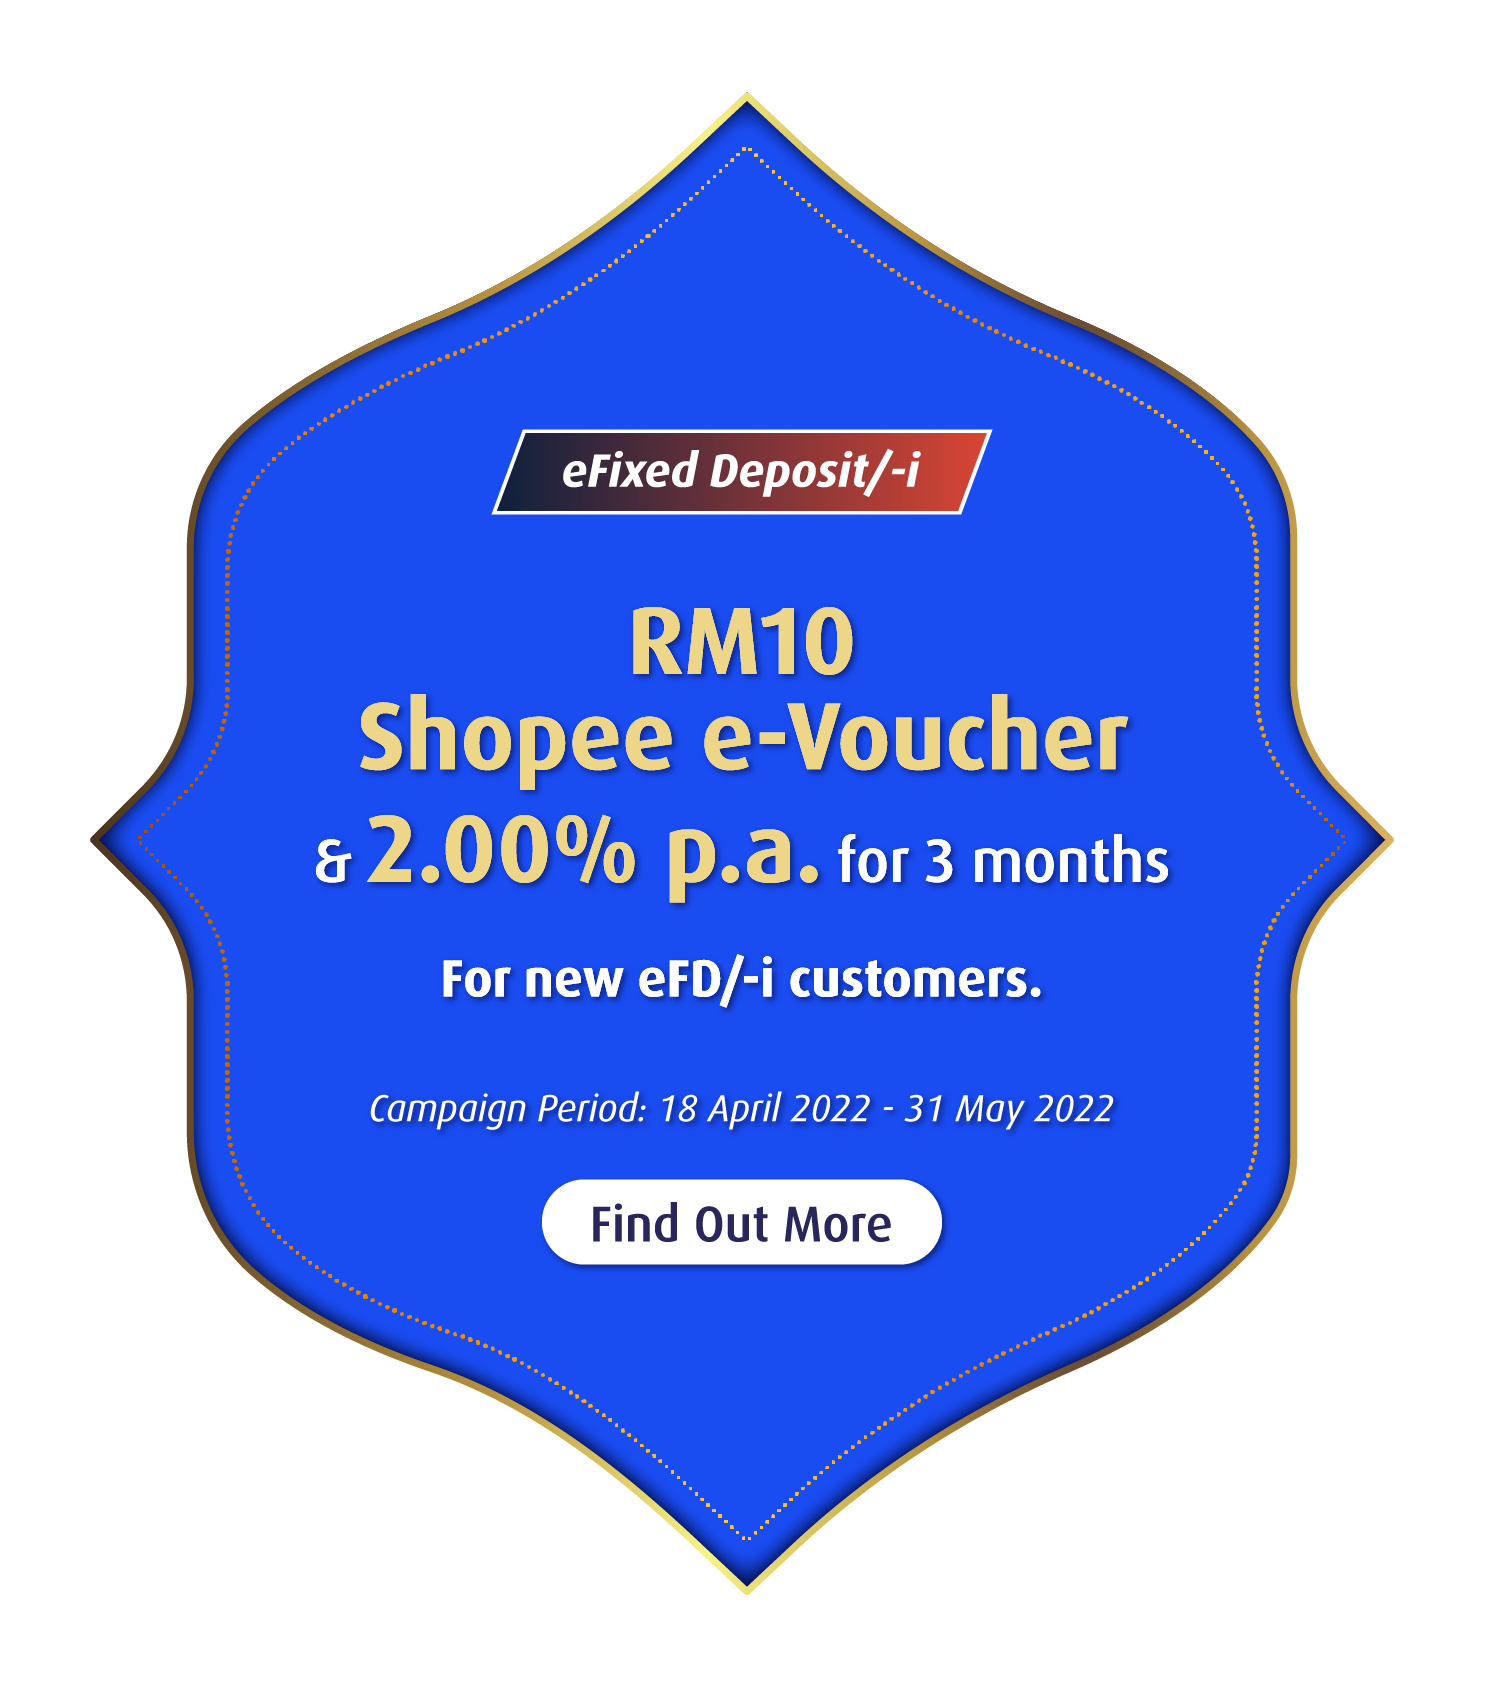 eFixed Deposit/-i 2.00% p.a. for 3 months & RM10 Shopee e-Voucher For new eFD/-i customers